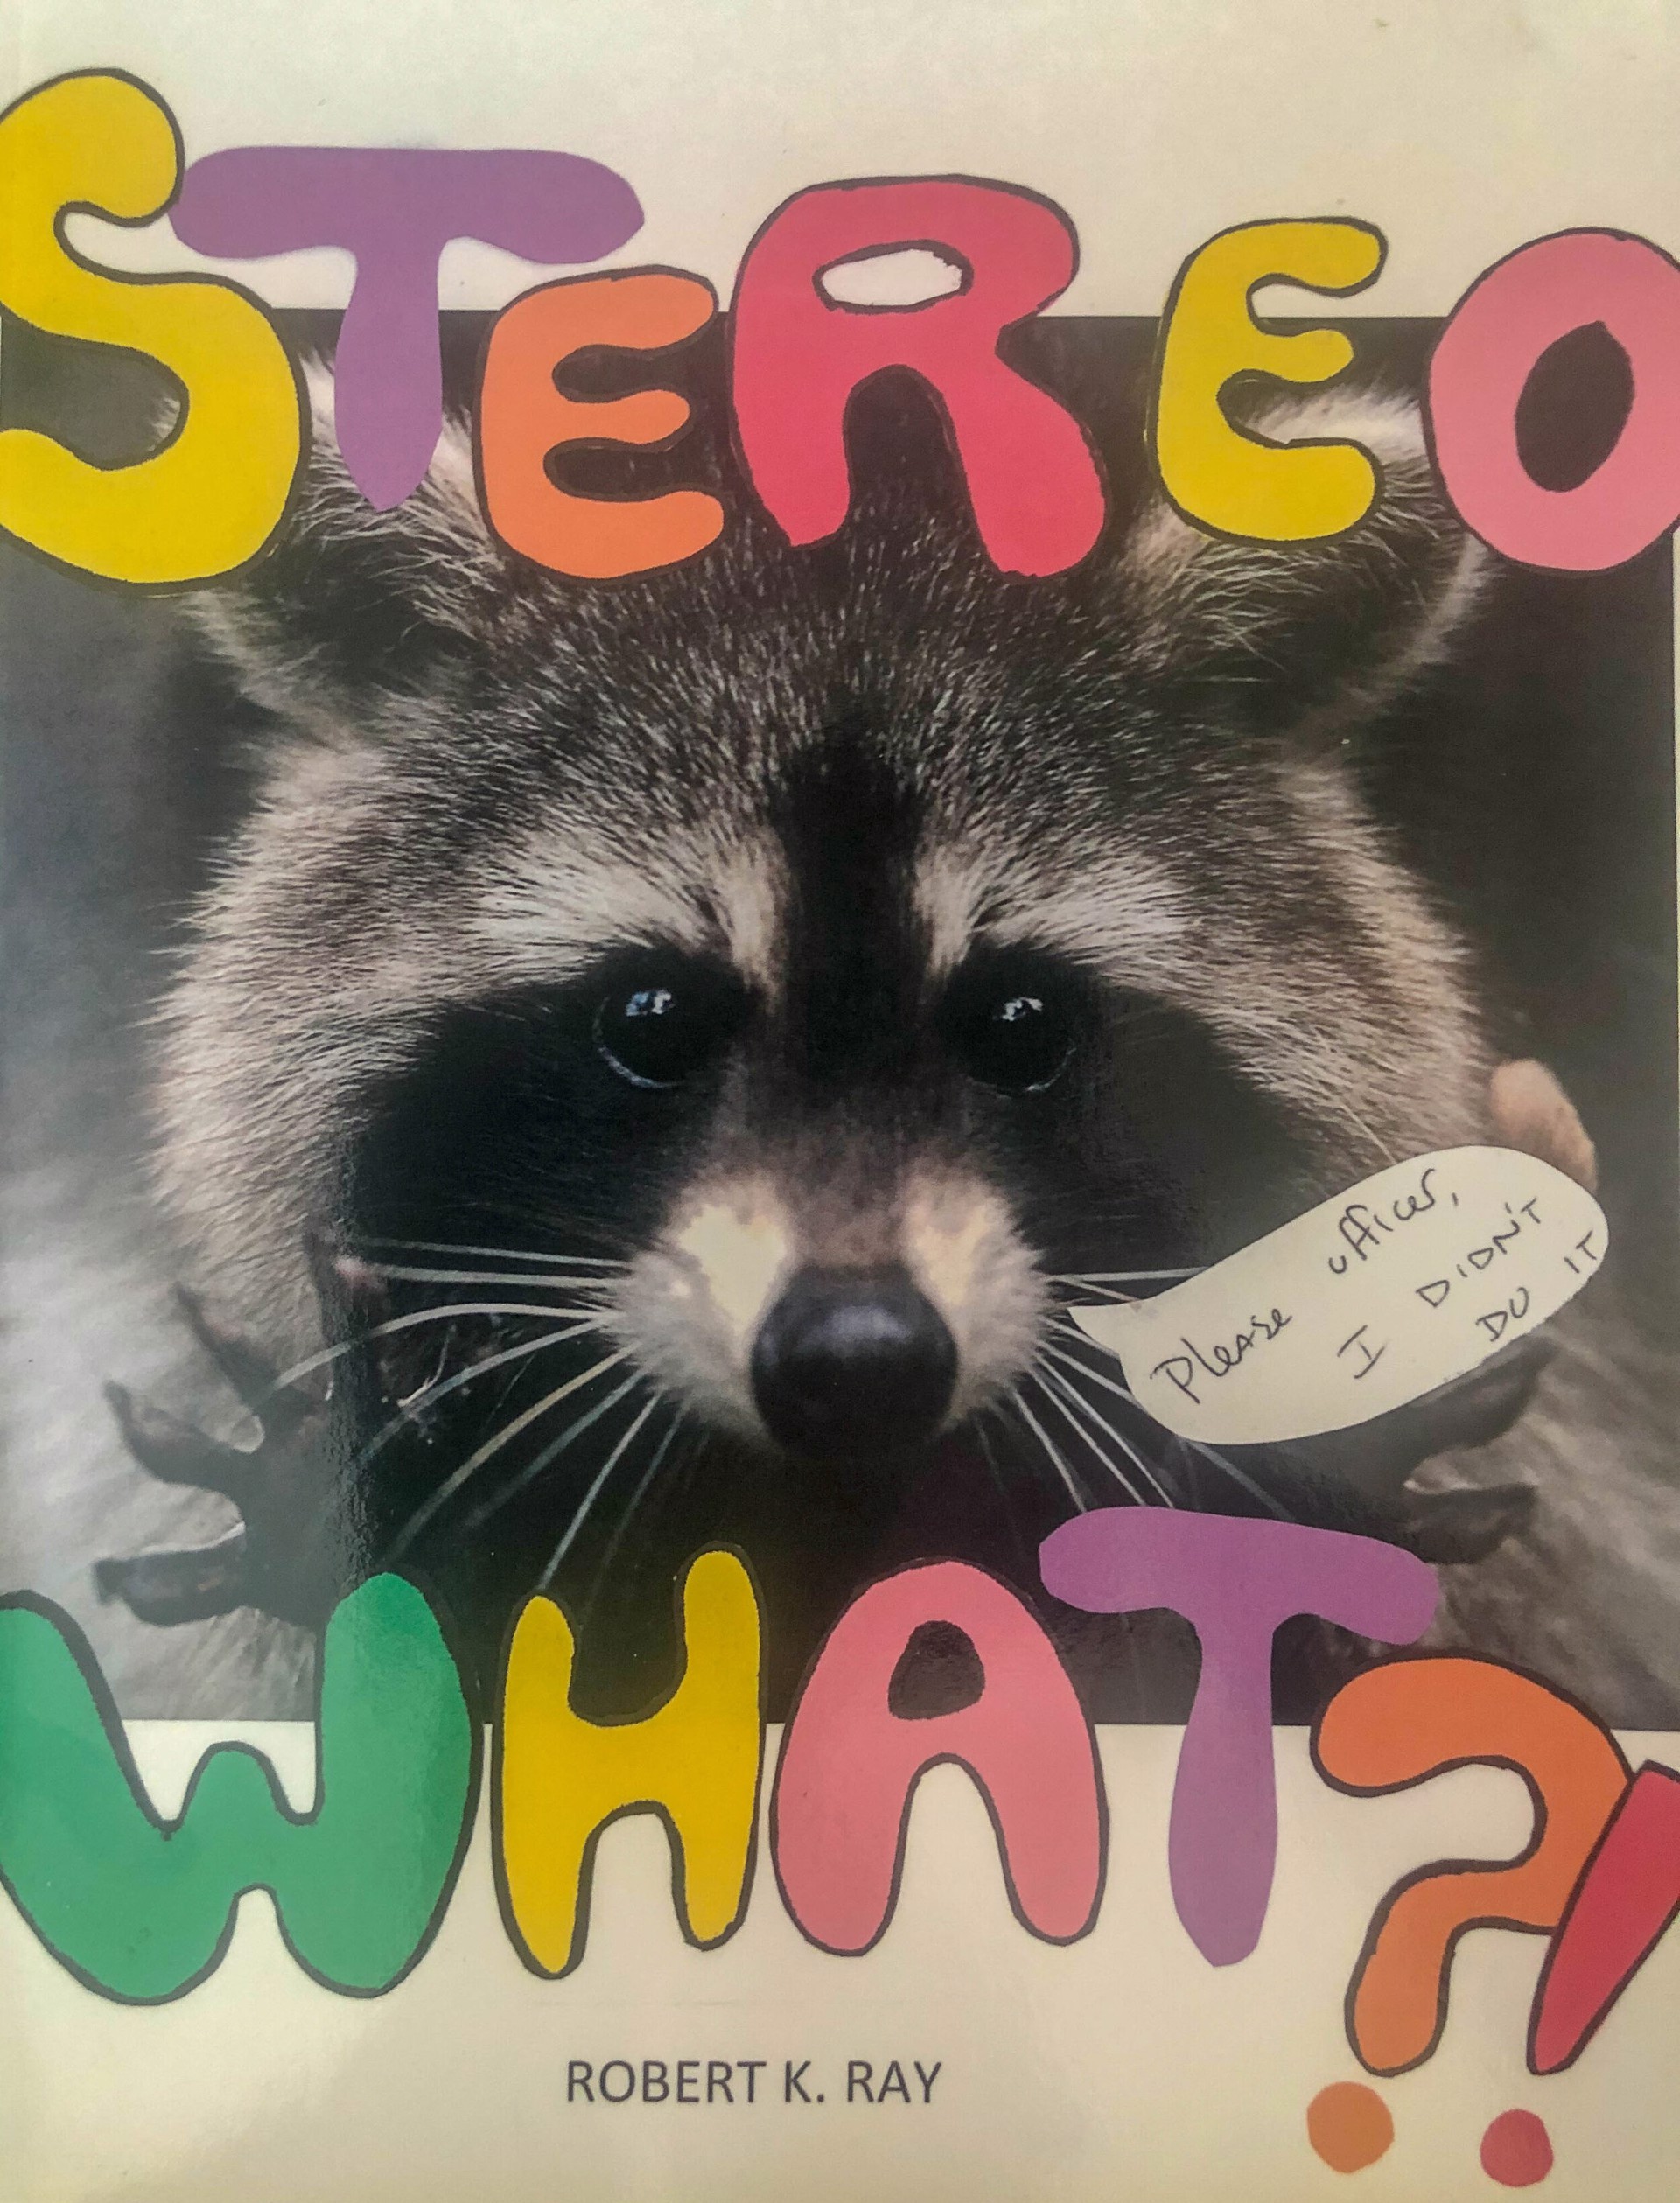 Stereo What? (A book) by Robert Ray